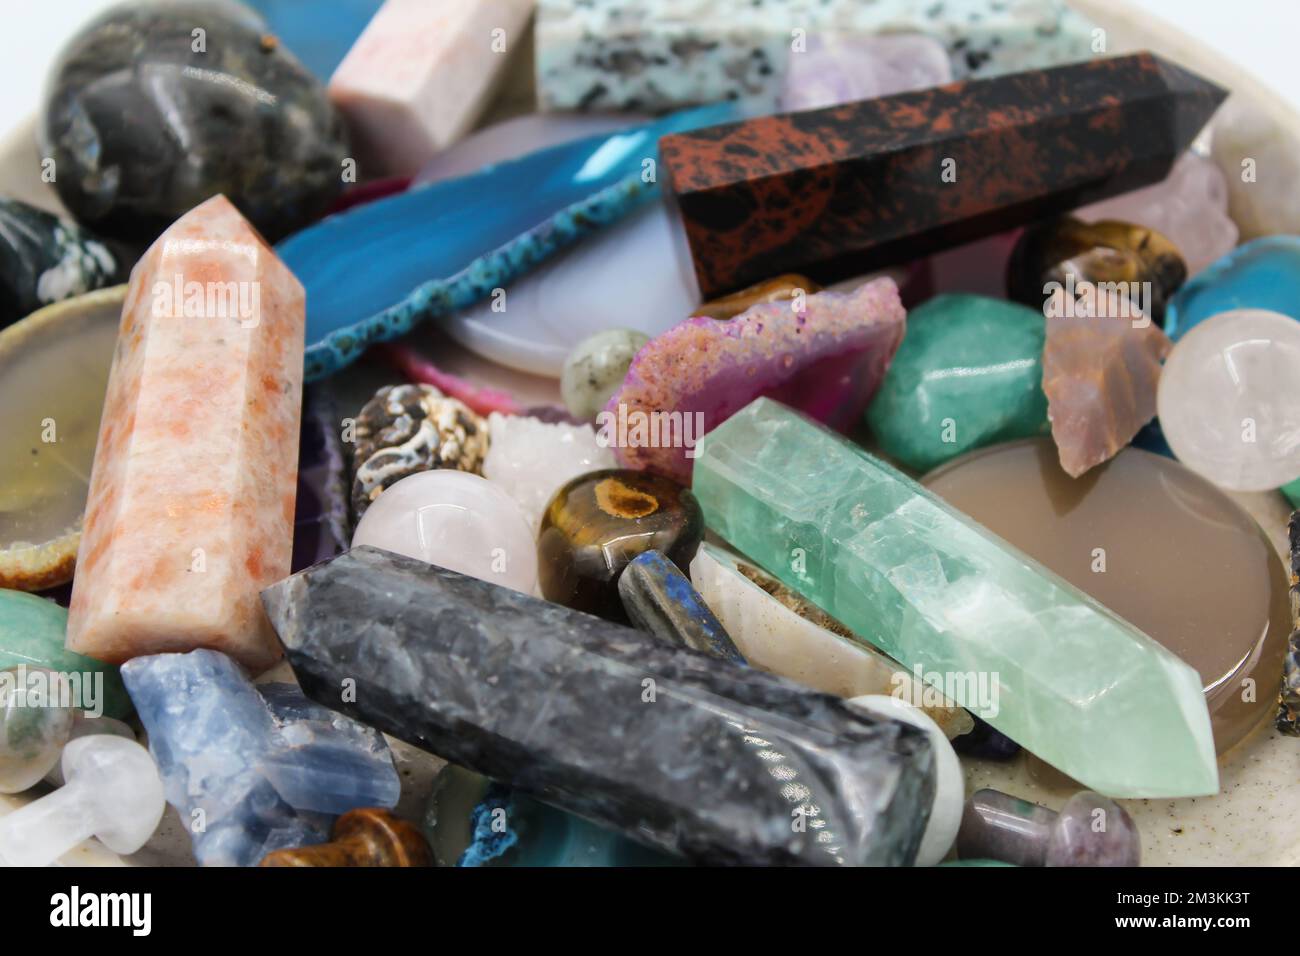 Semi precious gemstones minerals for meditation relaxation close up. Healing stones for Magic Crystal Ritual, Witchcraft, Chakra relaxation. Spiritual Stock Photo